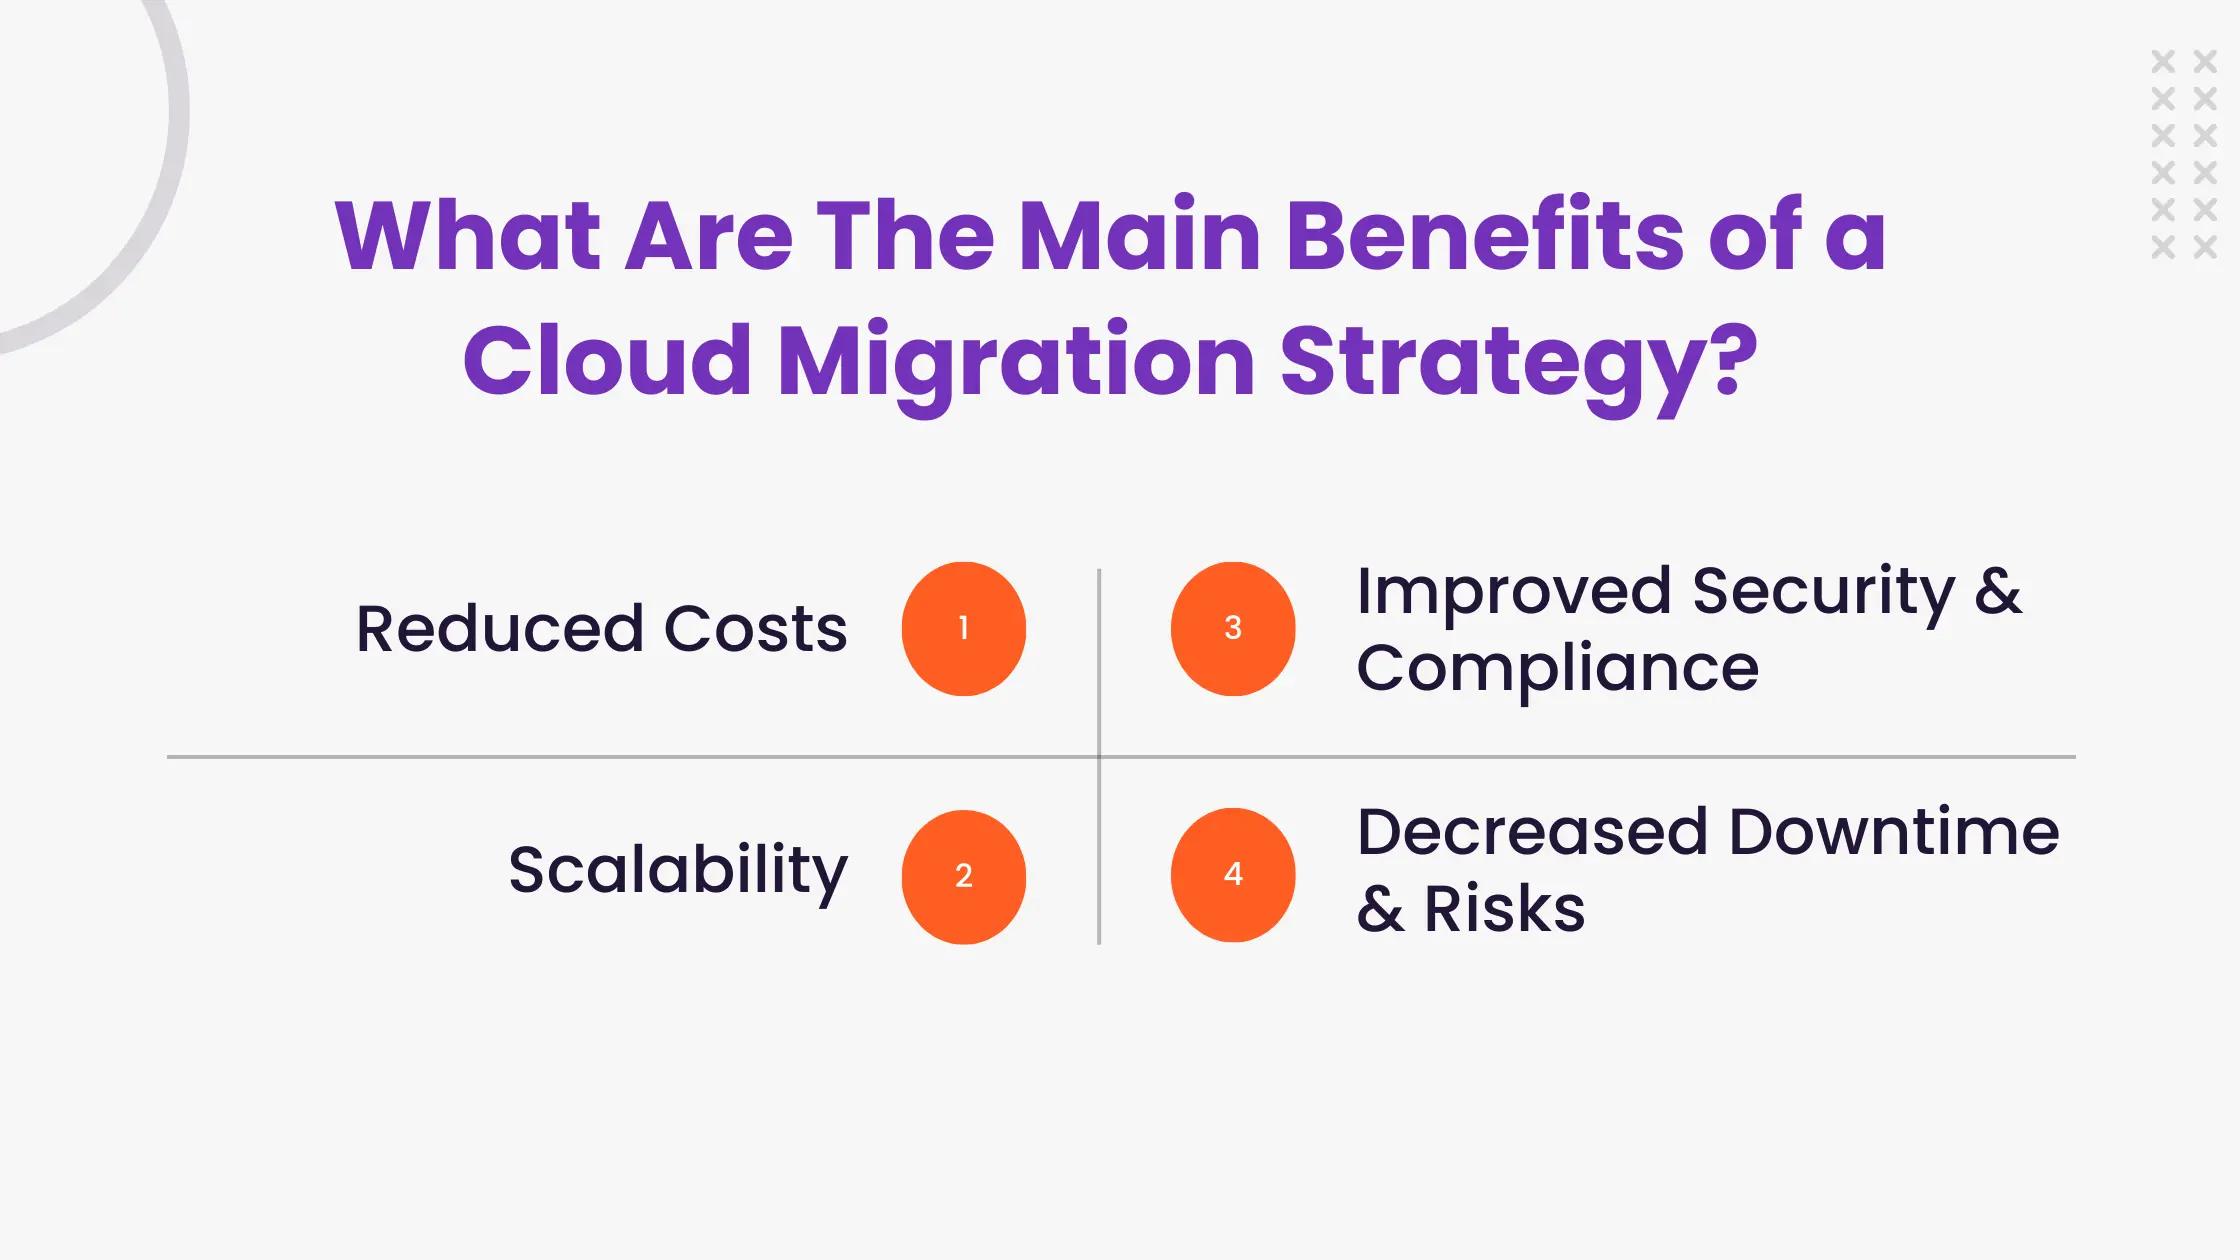 What Are The Main Benefits of a Cloud Migration Strategy